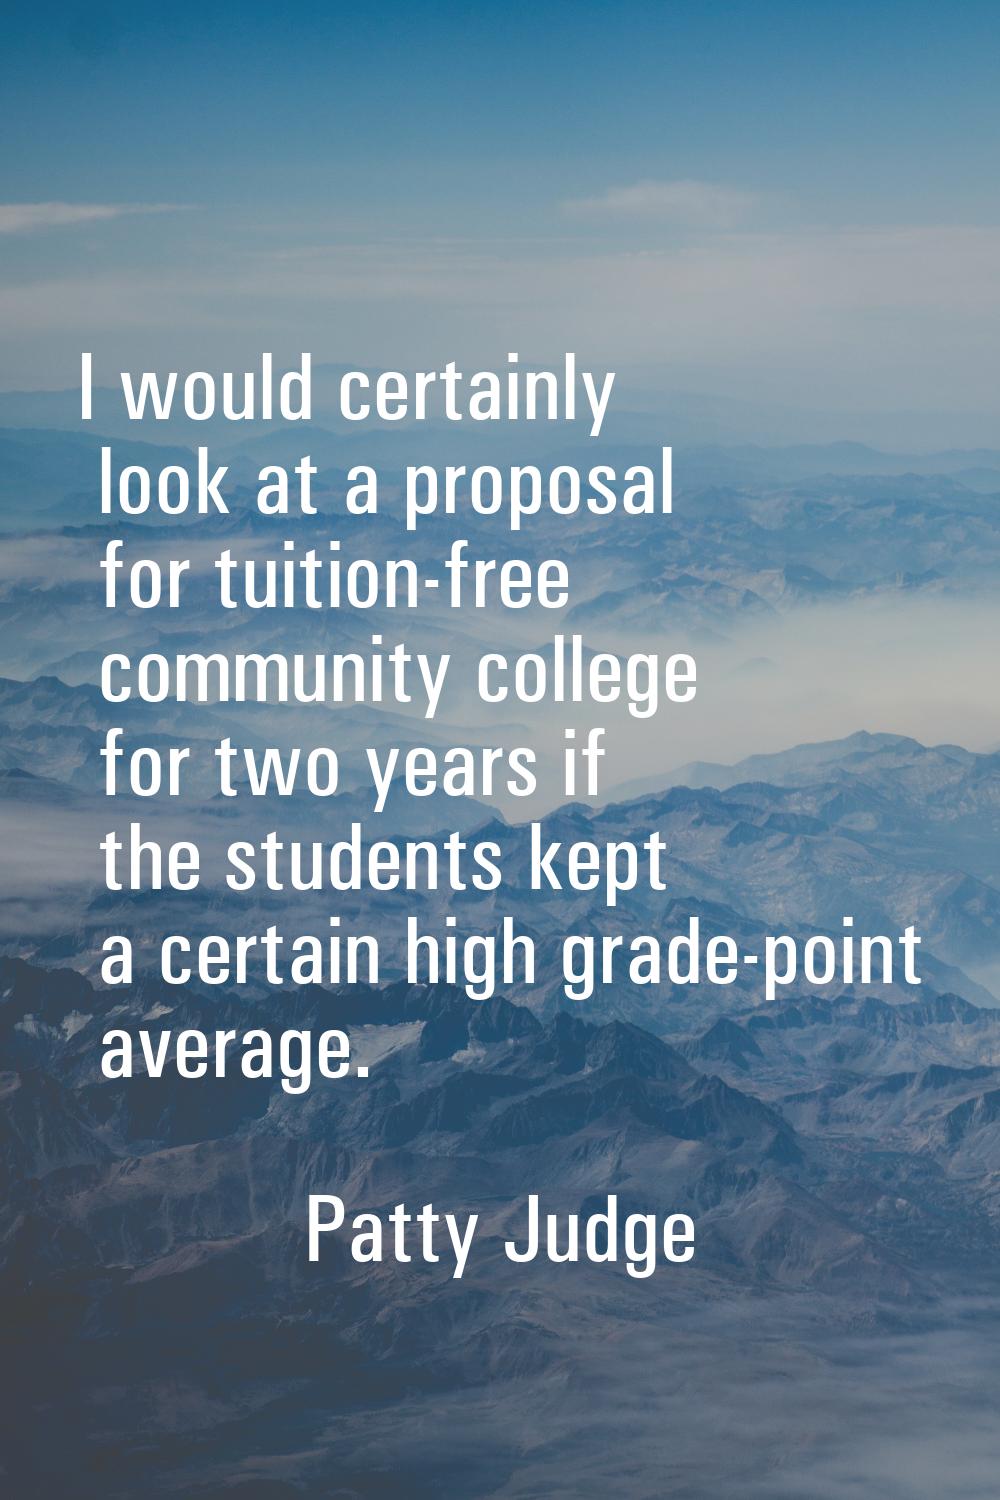 I would certainly look at a proposal for tuition-free community college for two years if the studen